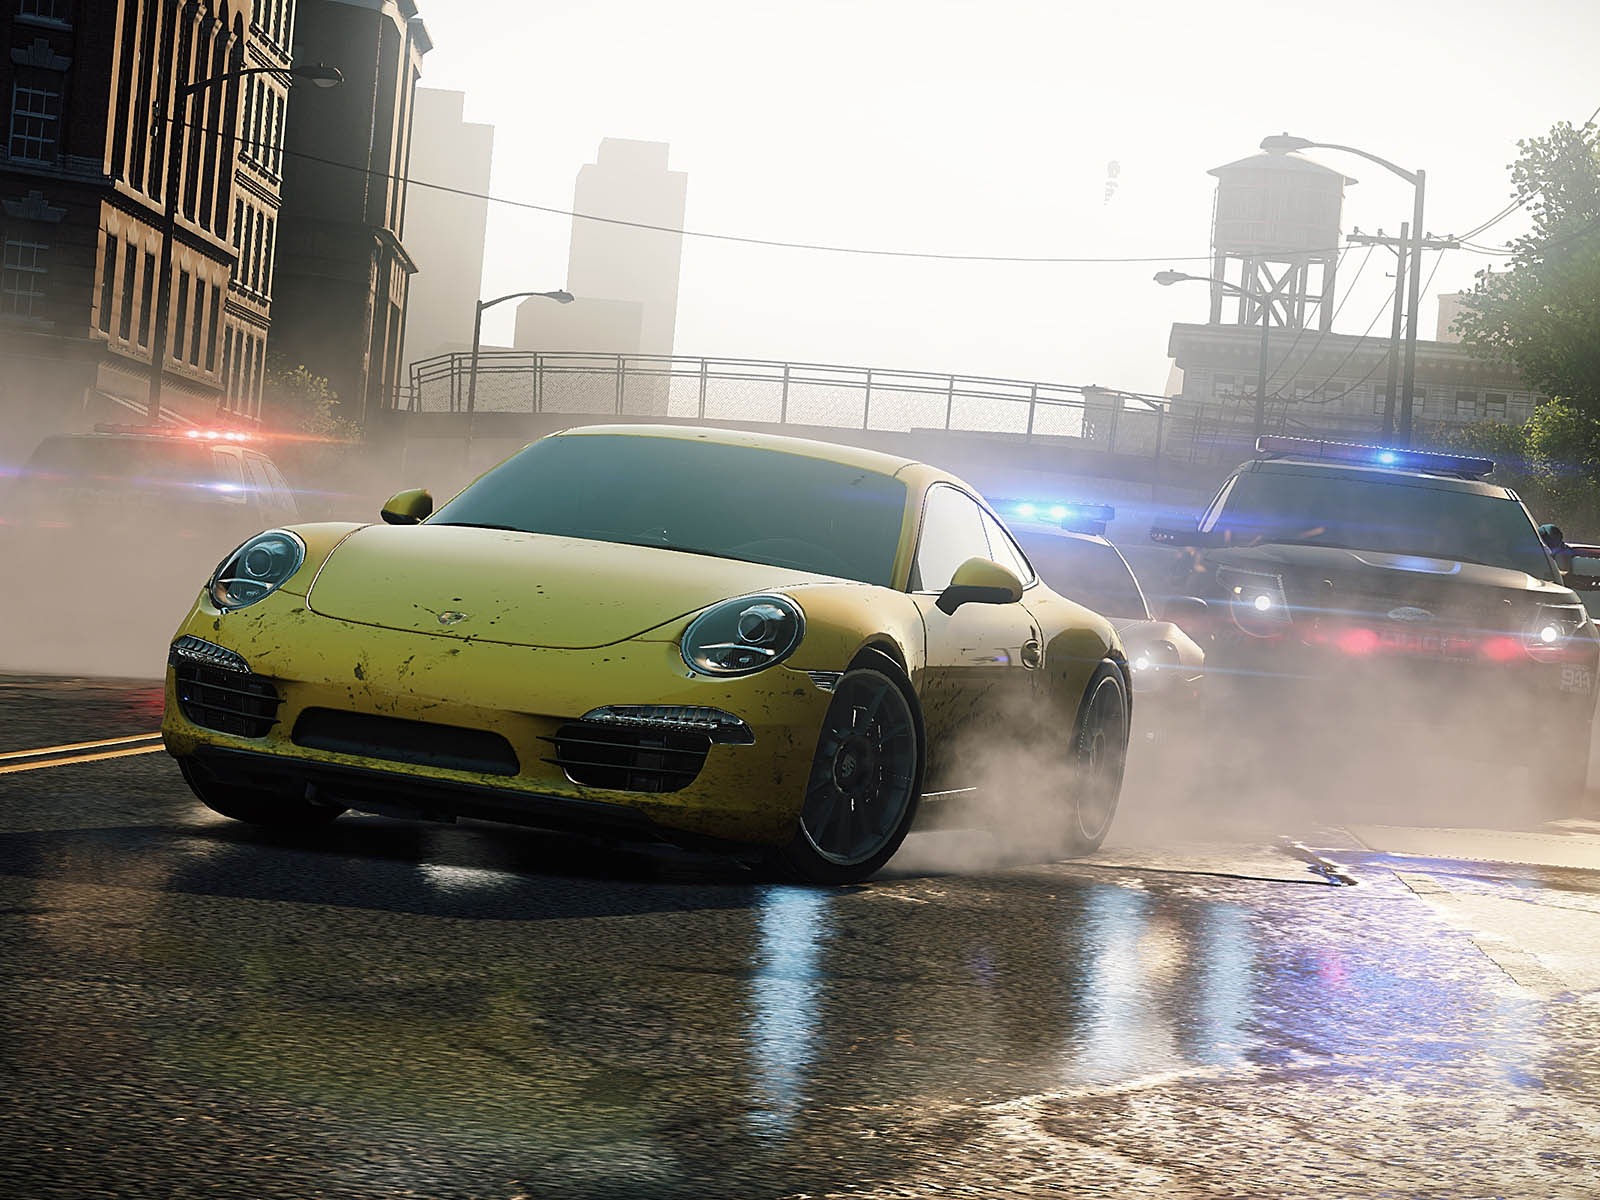 Need for Speed: Most Wanted 极品飞车17：最高通缉 高清壁纸18 - 1600x1200